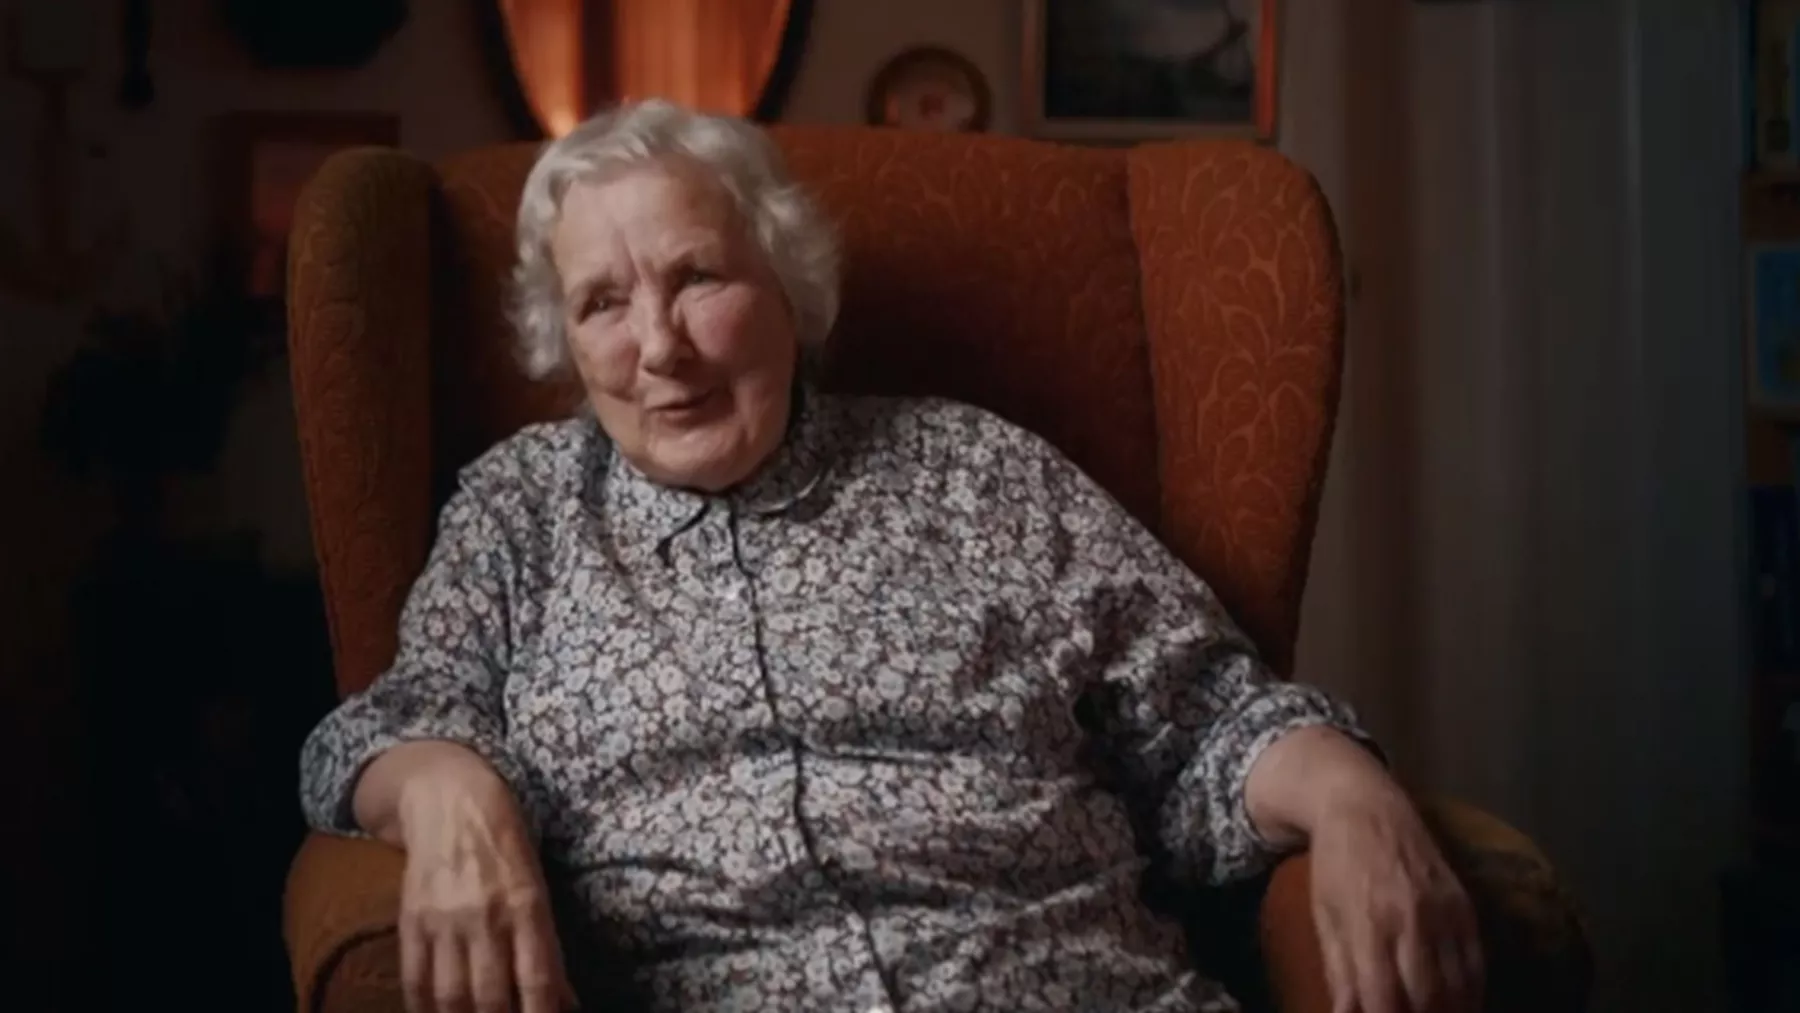 A lady with grey hair sits in an armchair looking towards the camera